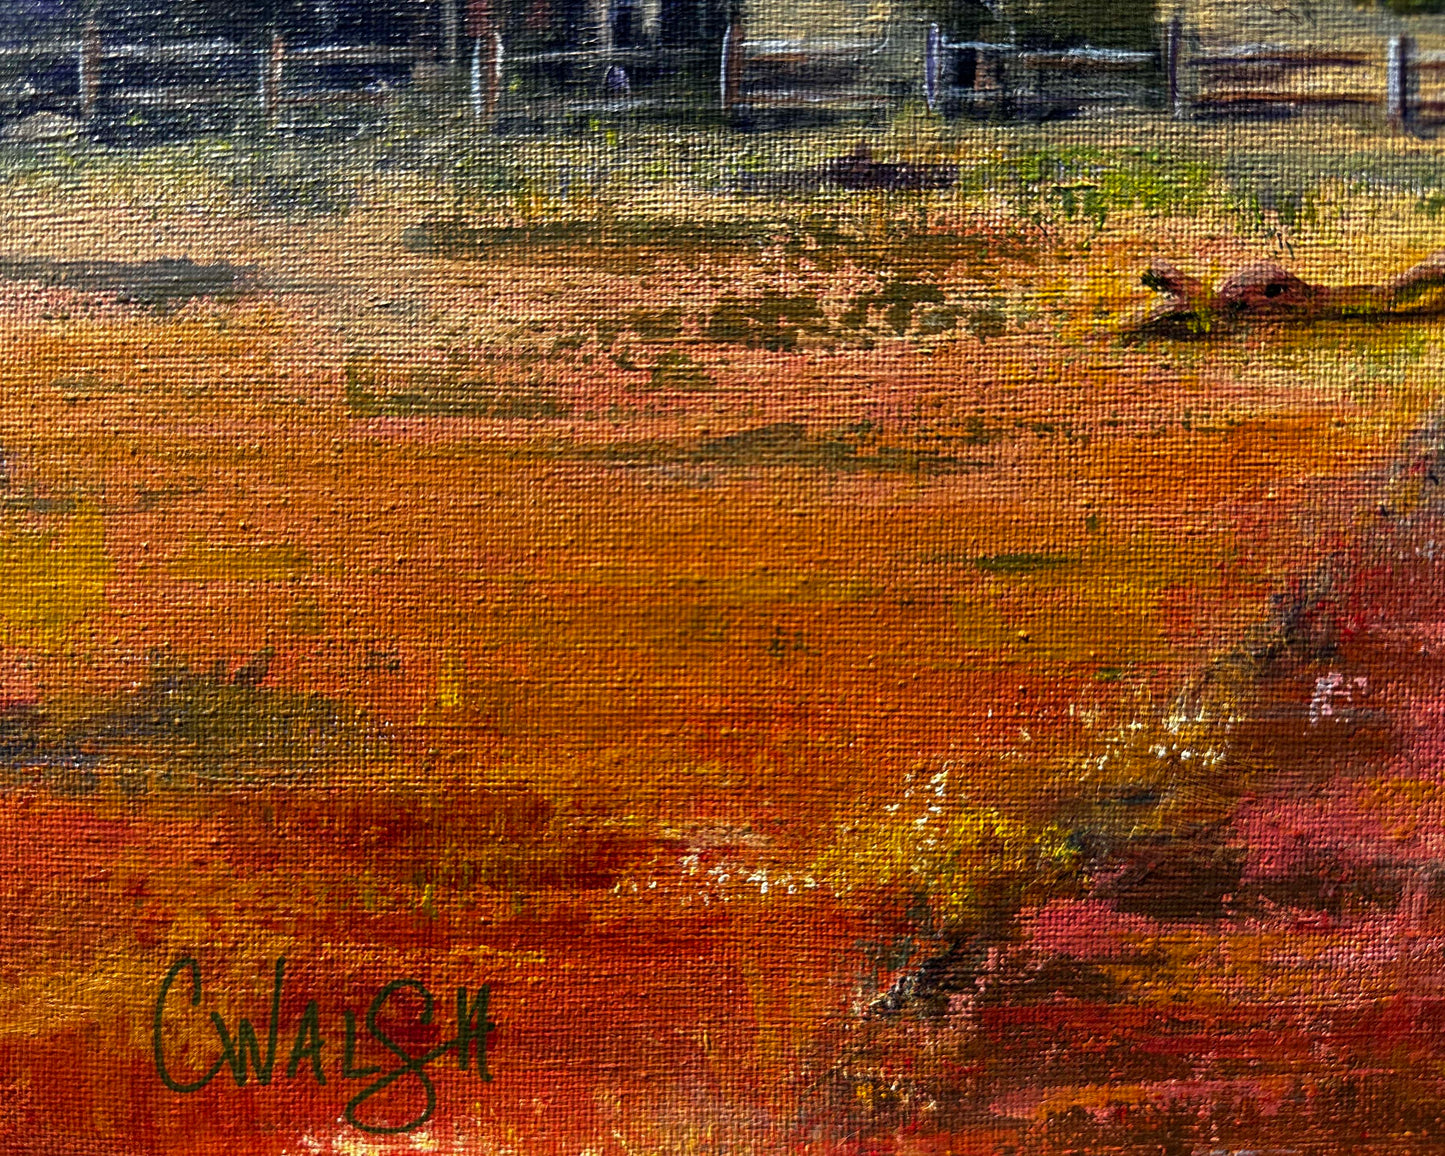 Private Commission: "Homestead Hideaway" Acrylic on Canvas - 40cm x 50cm (framed)